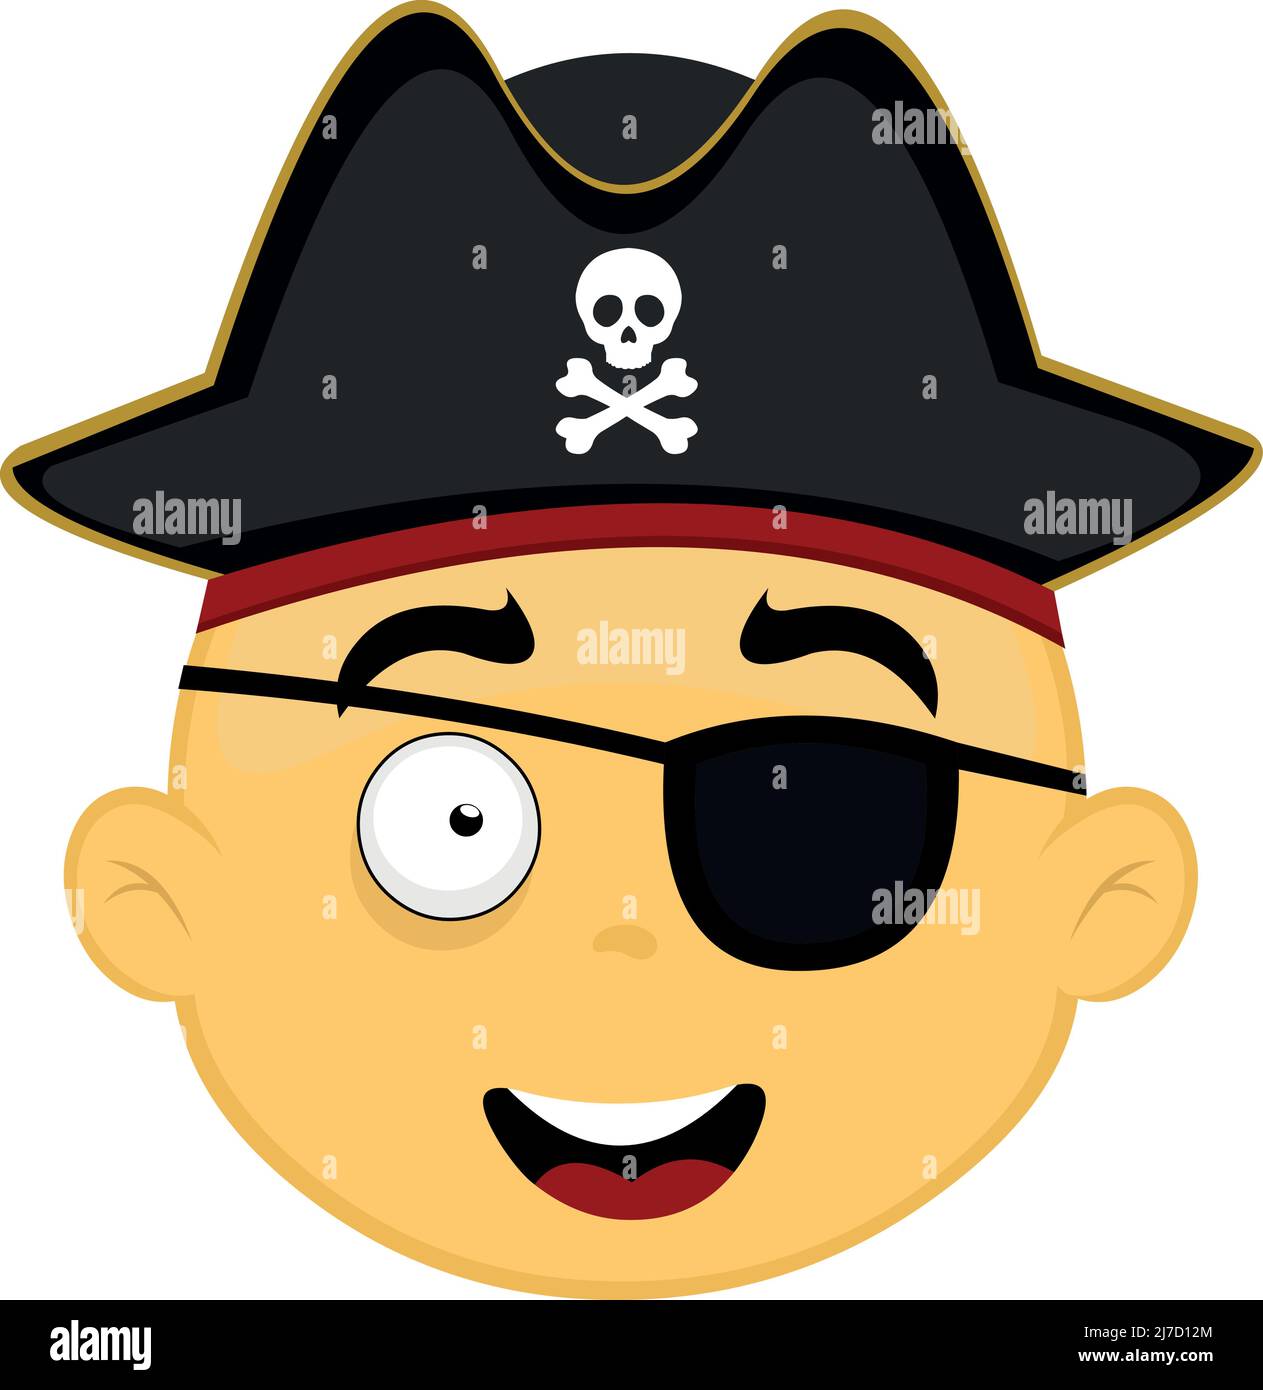 Vector illustration of a yellow cartoon pirate face with a hat and eyepatch Stock Vector